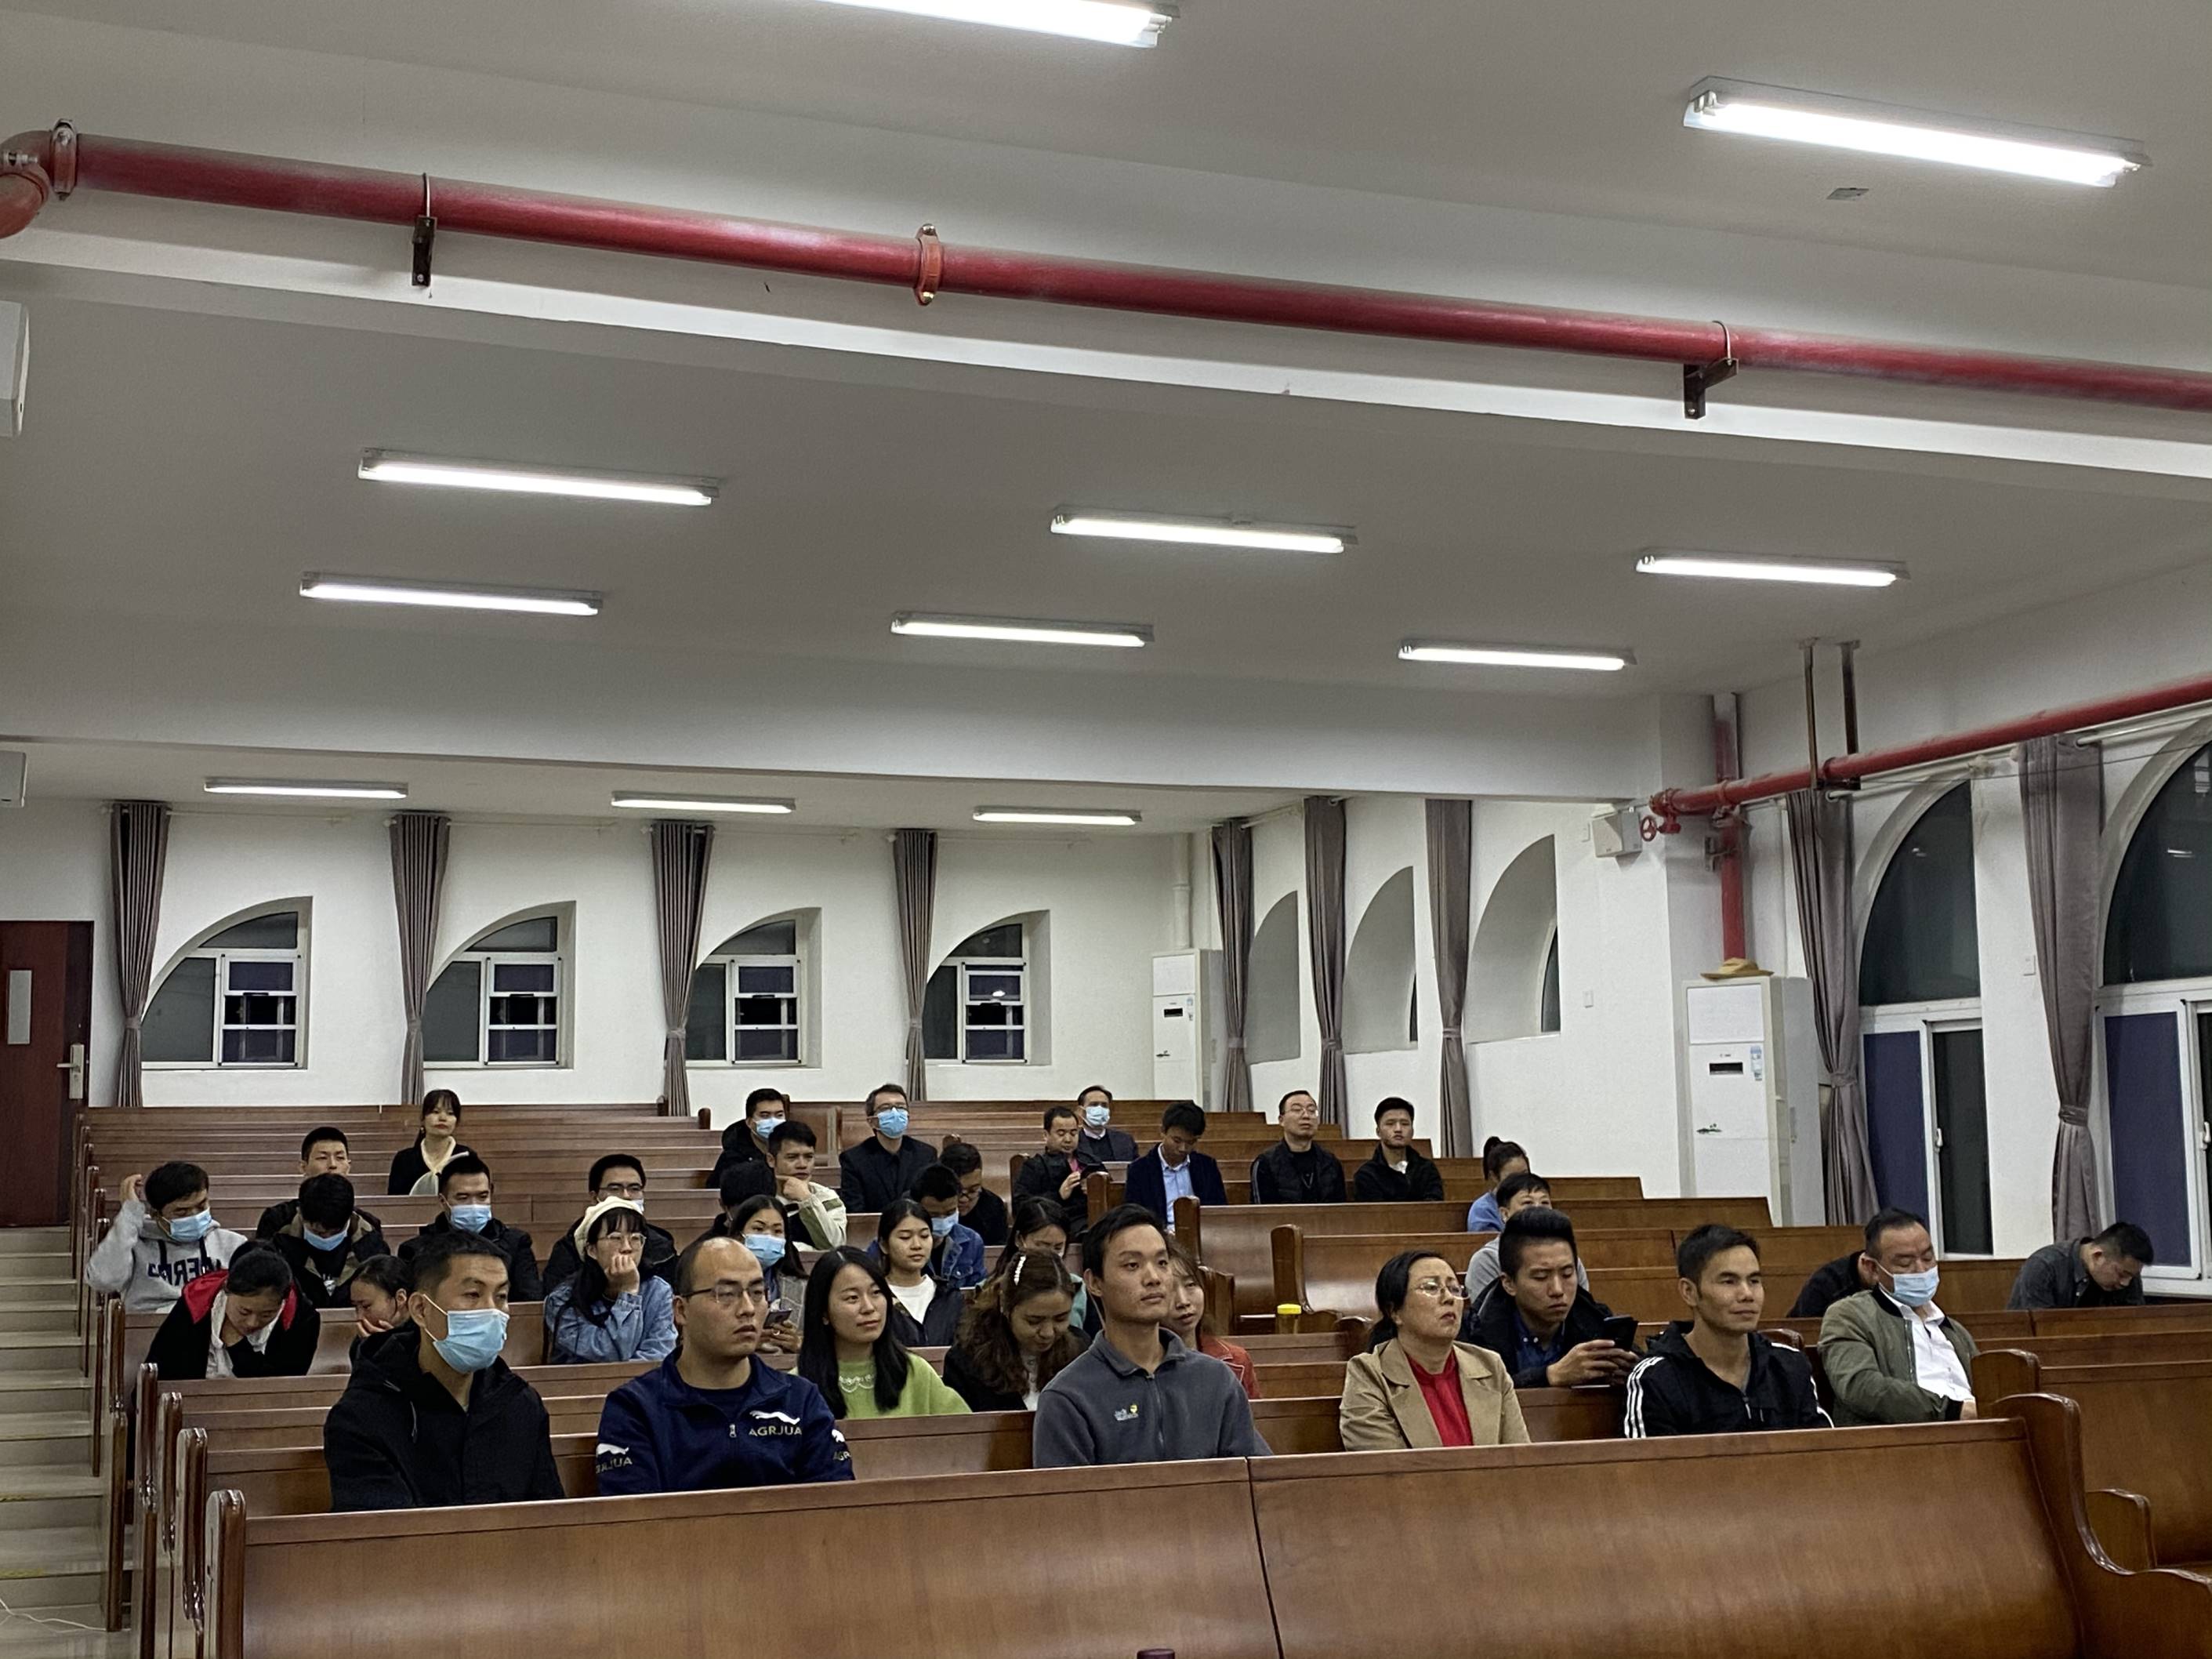 On October 20, the Research Department of Zhongnan Theological Seminary held a Seminar on how to write rerm paper and academic thesis.Some students and teachers attended